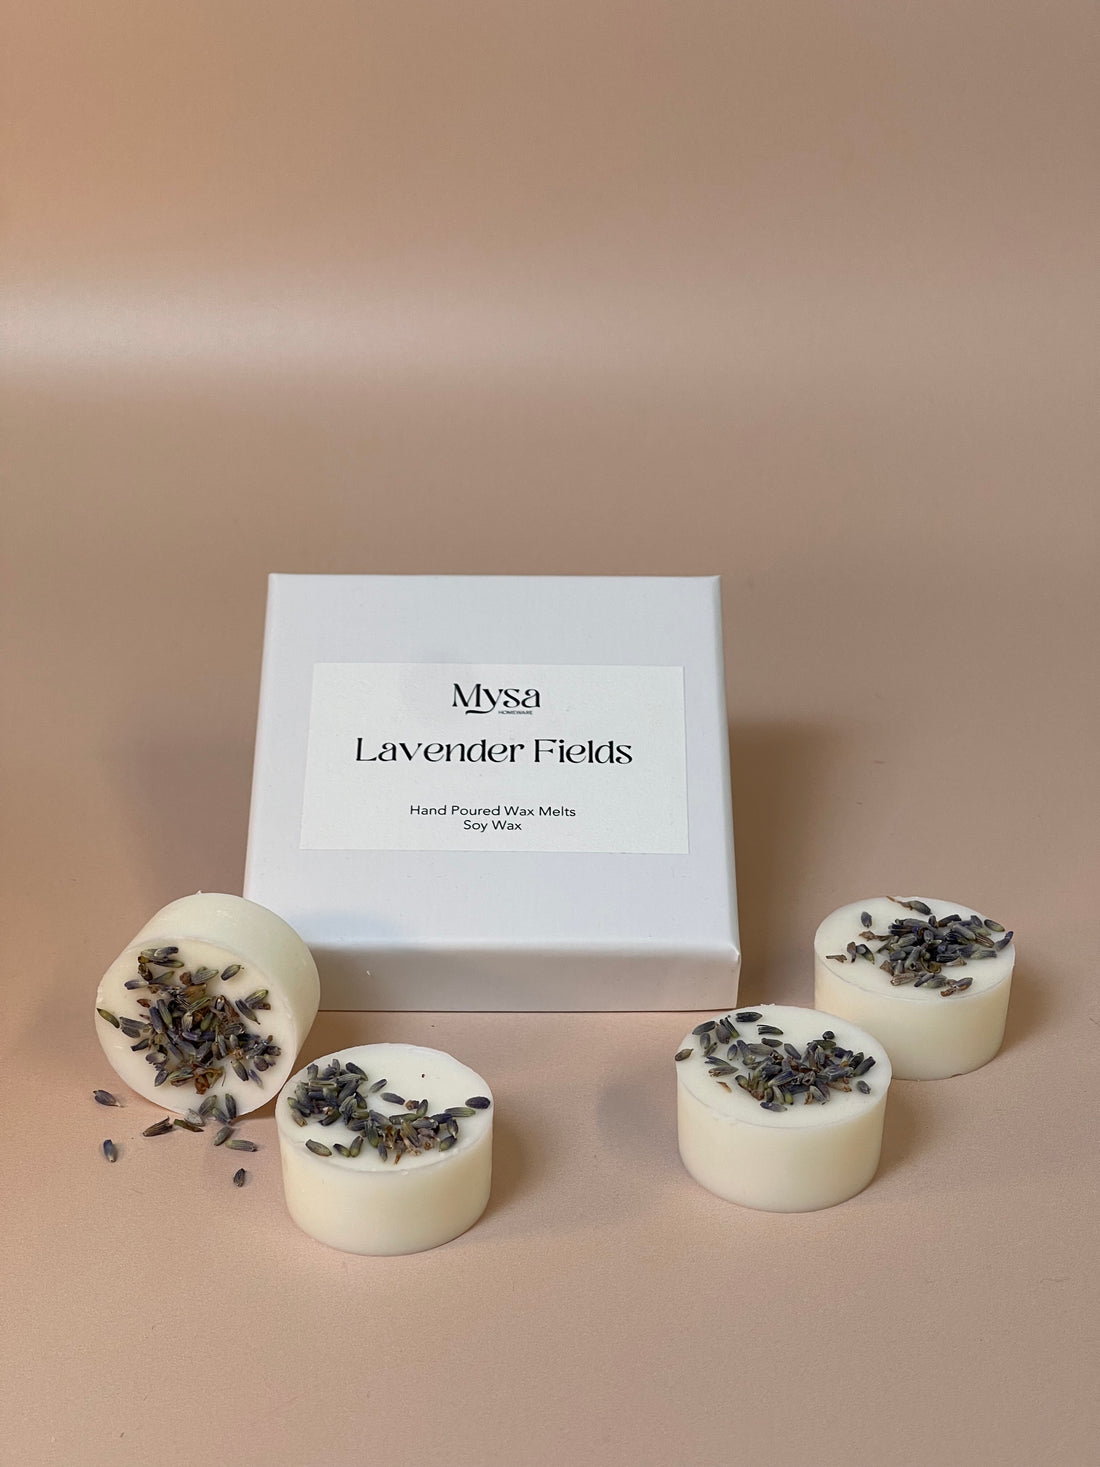 Lavender Fields luxury scented wax melts in gift box, with soy wax and lavender fragrance.